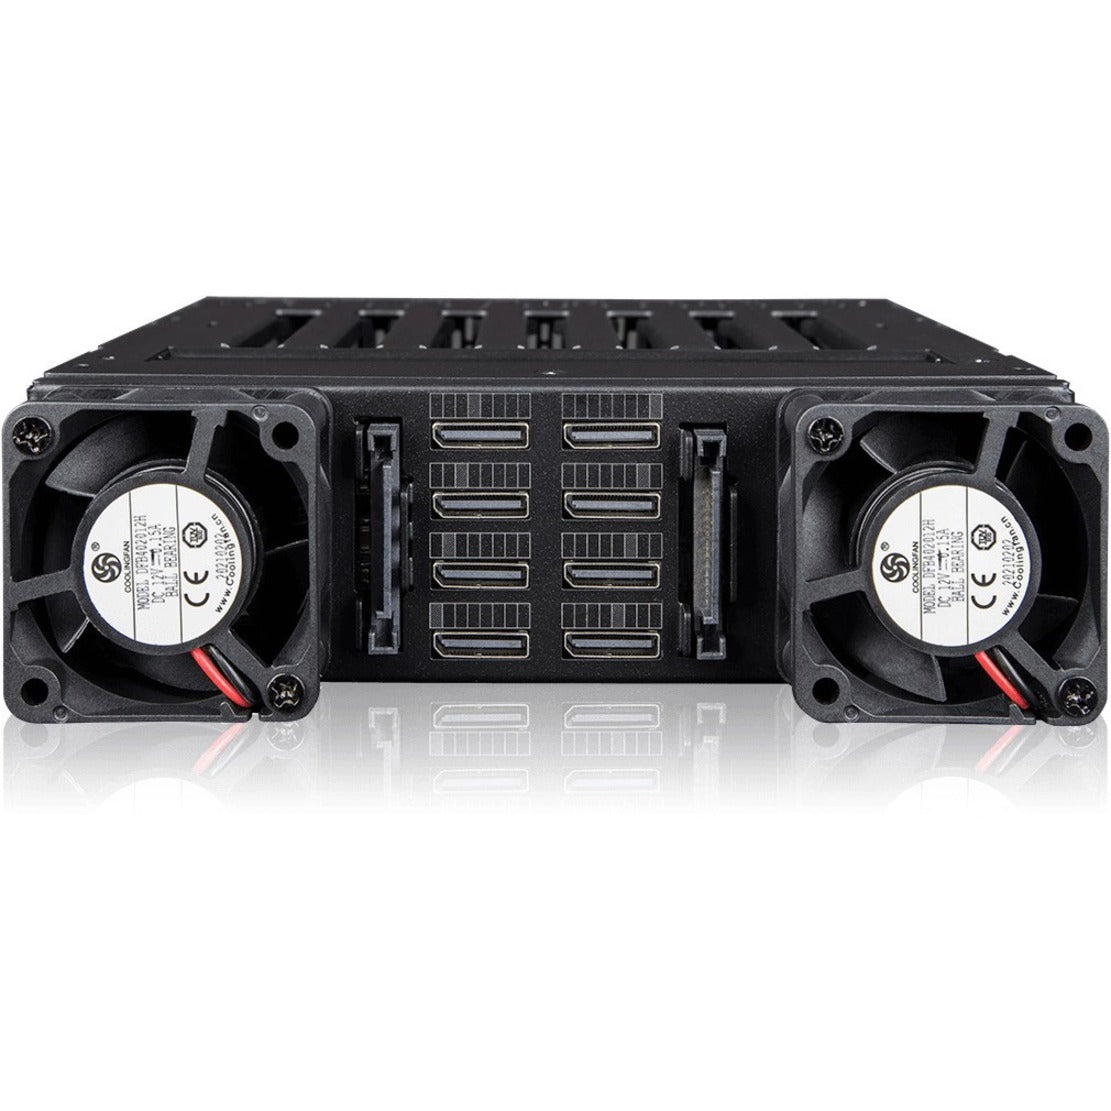 Icy Dock ToughArmor MB873MP-B Drive Enclosure for 5.25" PCI Express NVMe M.2 - SFF-8612 OCuLink Host Interface Internal - Black